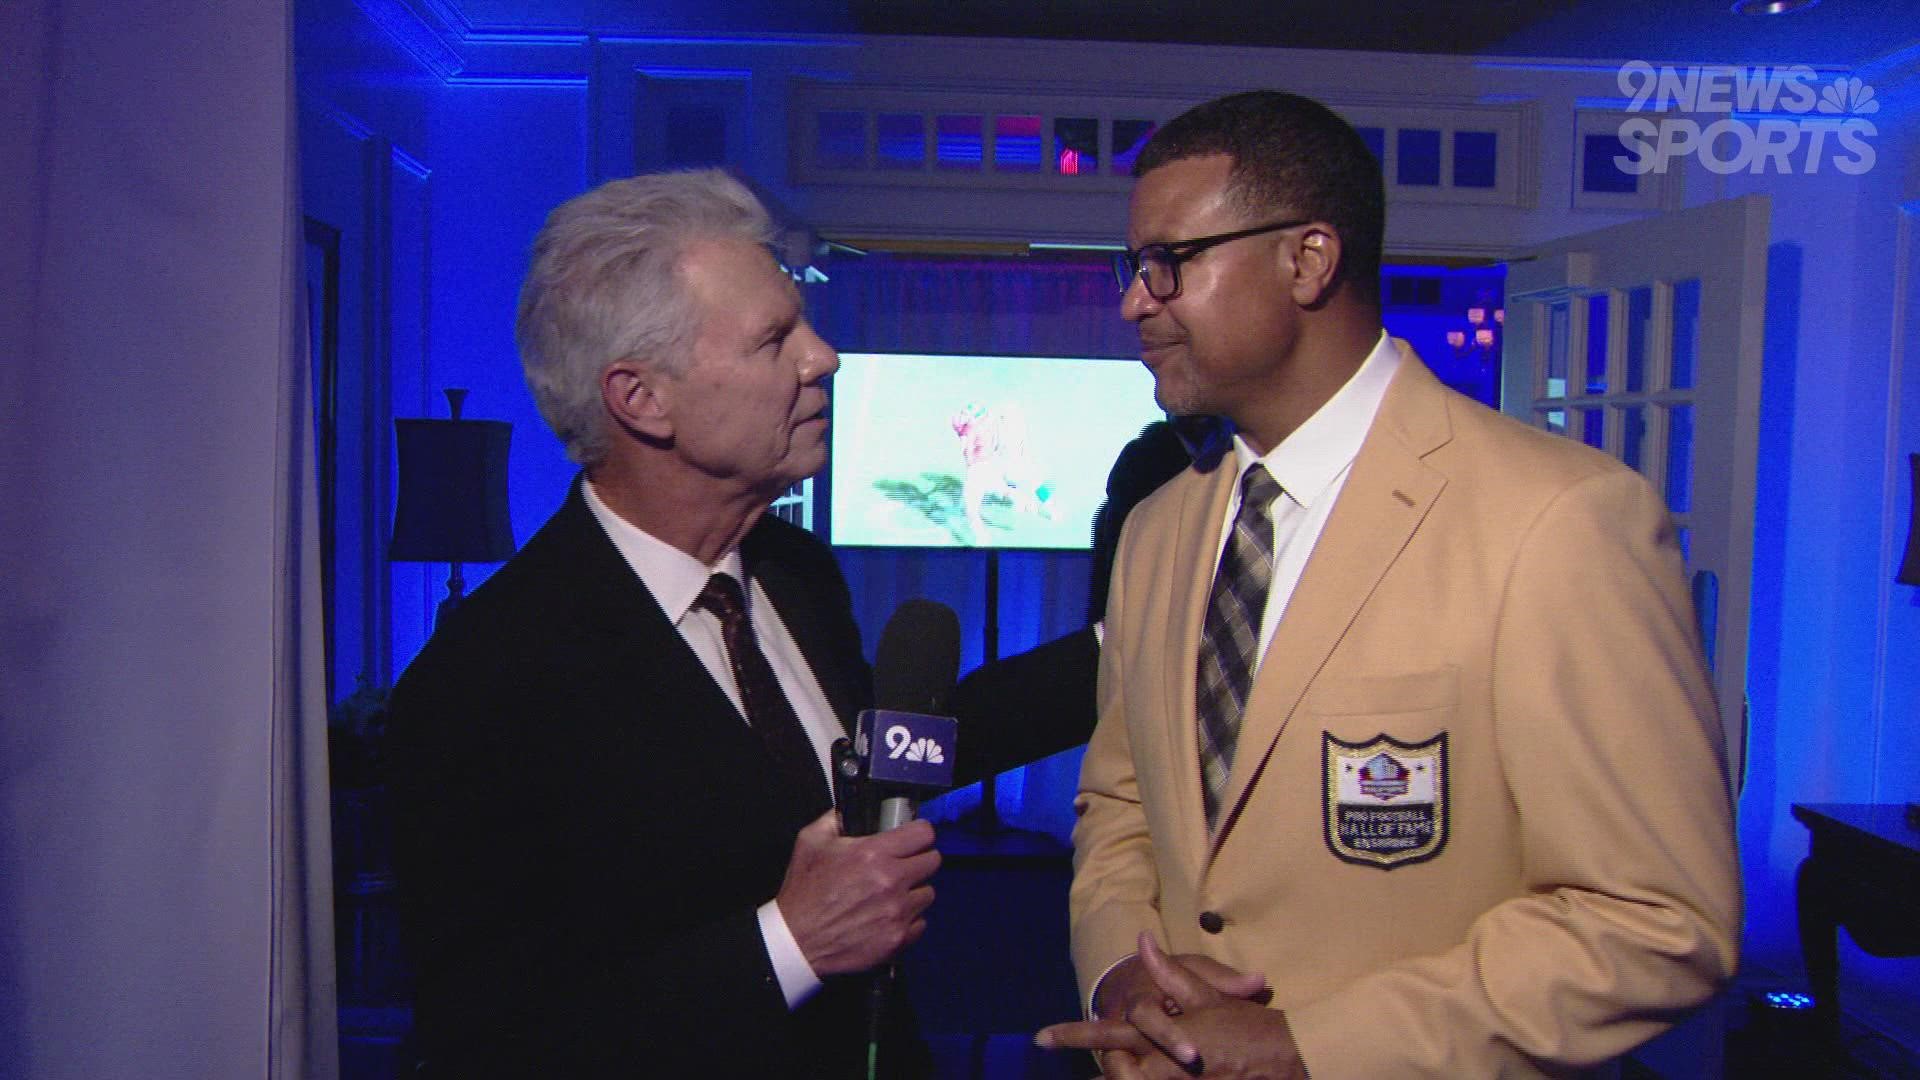 Mike Klis caught up with former Denver Broncos safety and now Hall of Famer Steve Atwater after he got his gold jacket.